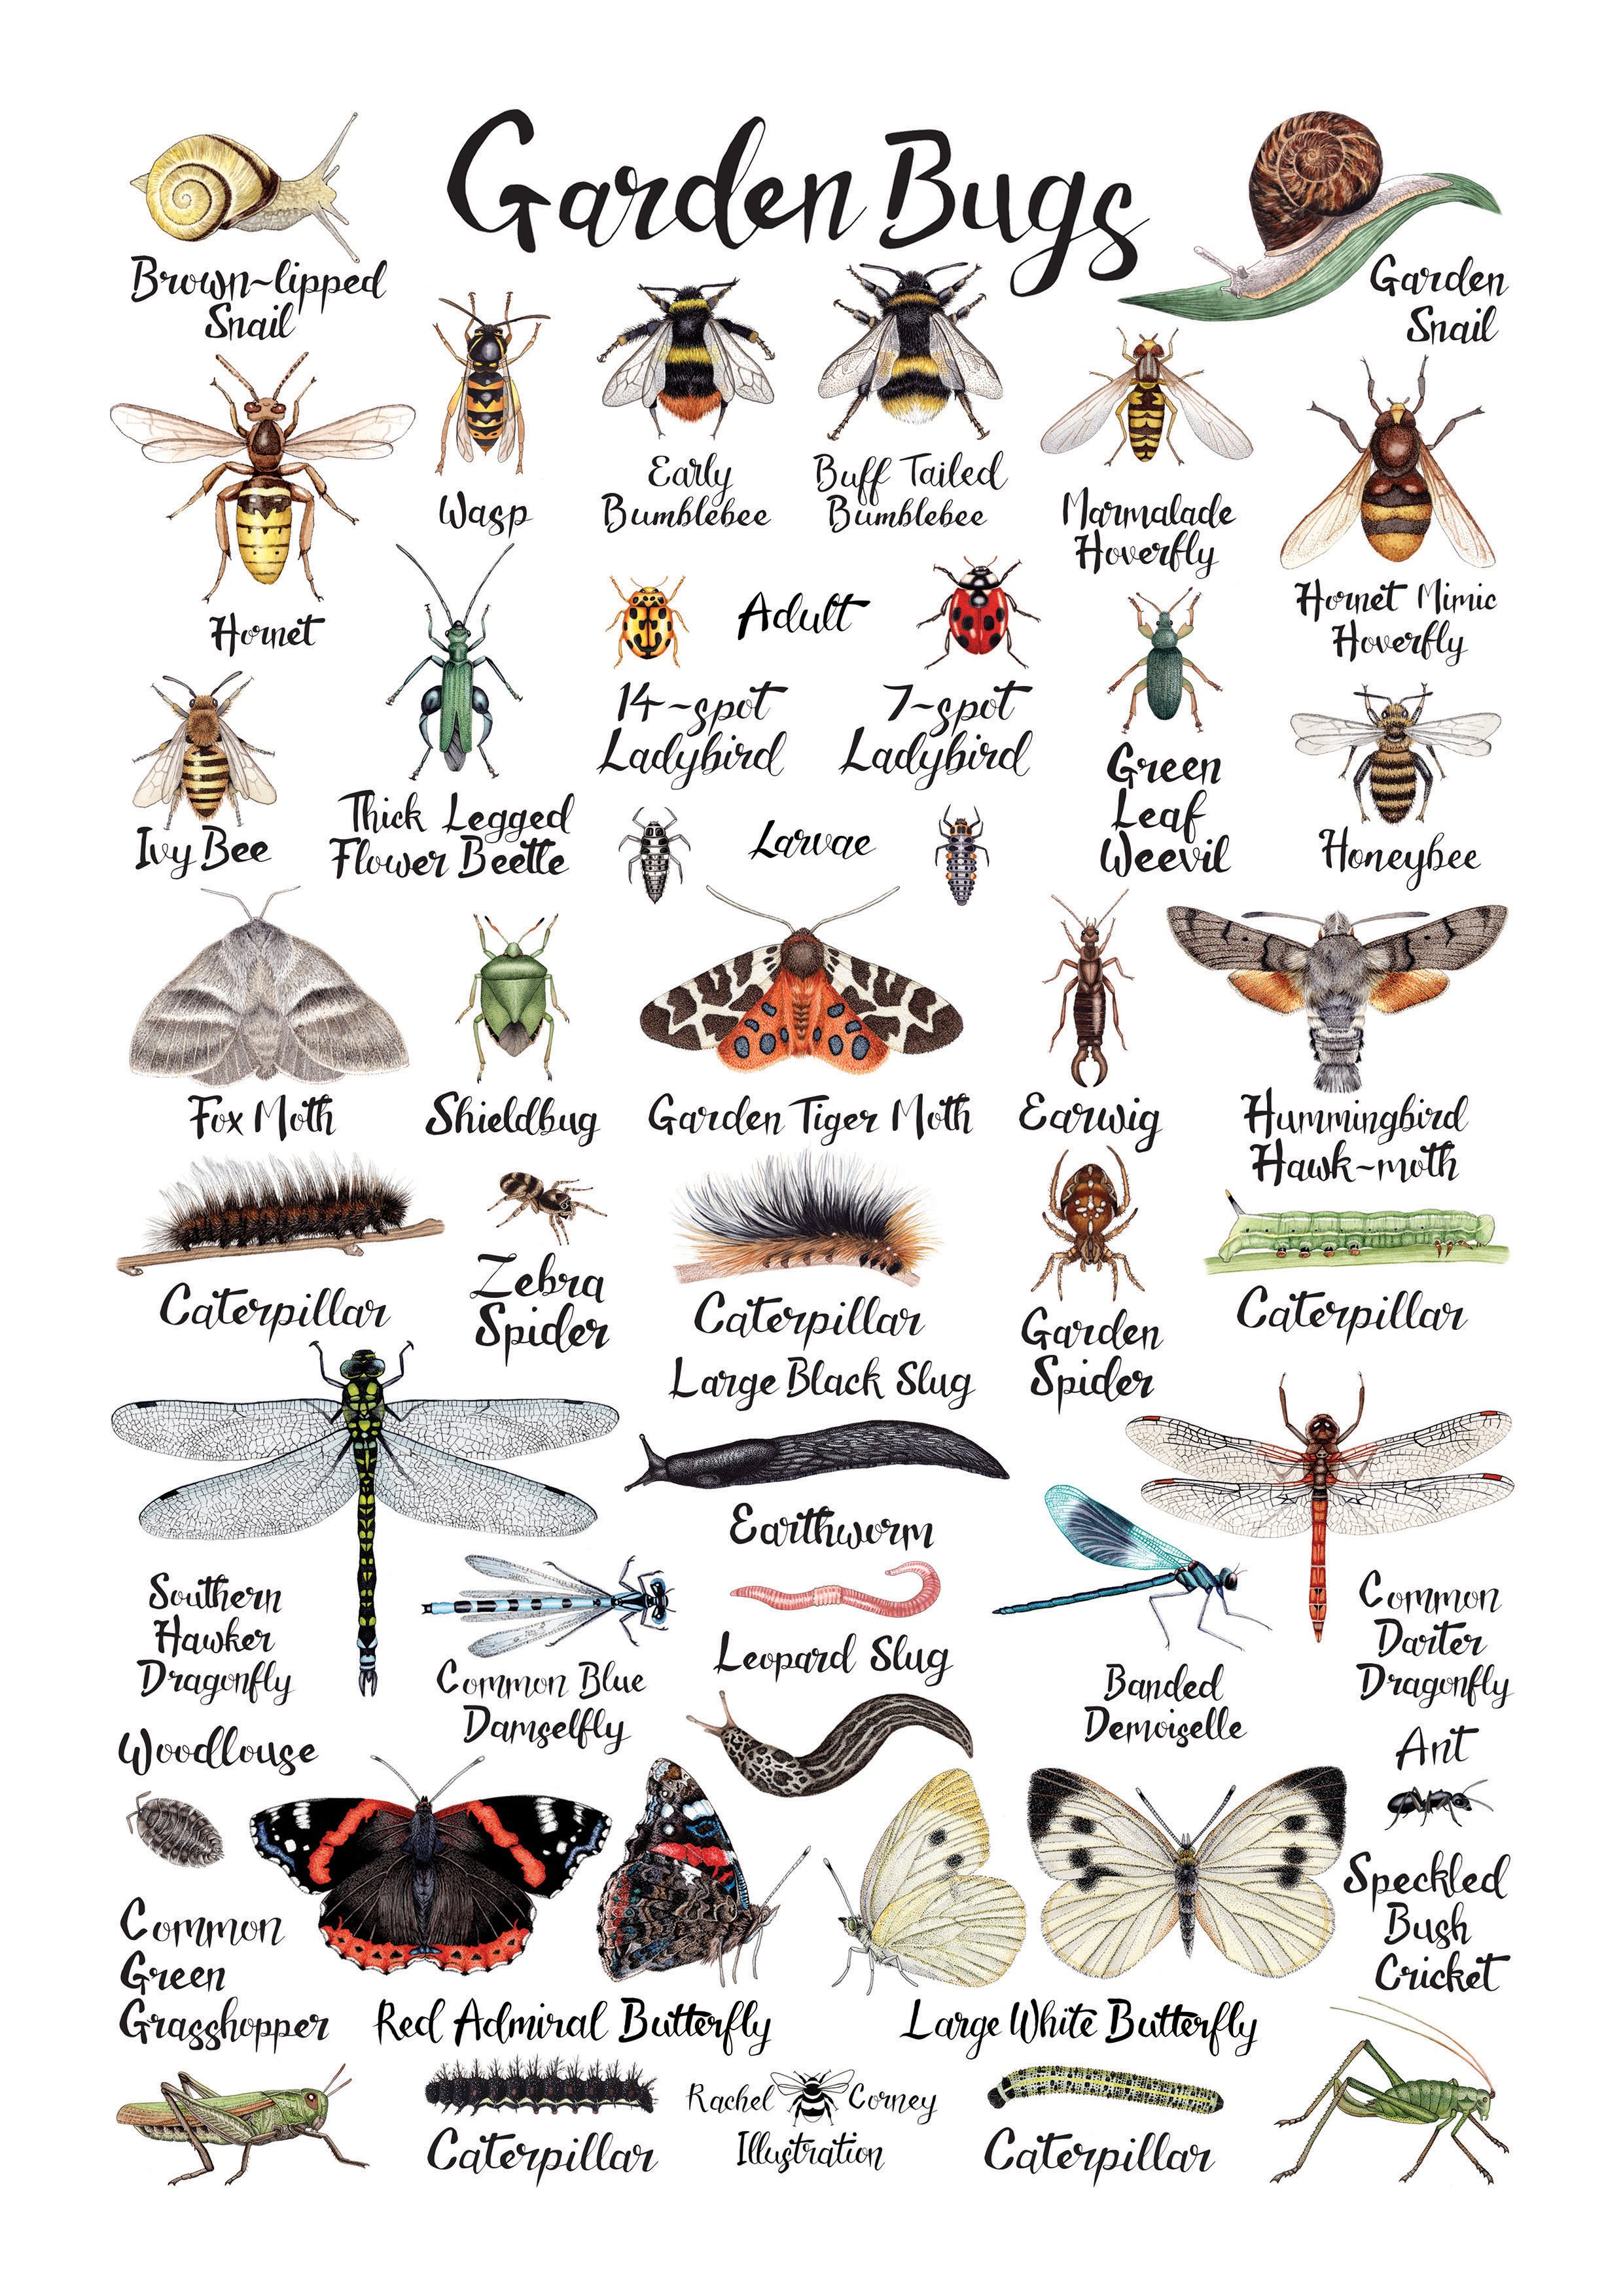 Garden Bugs Ilrated Poster